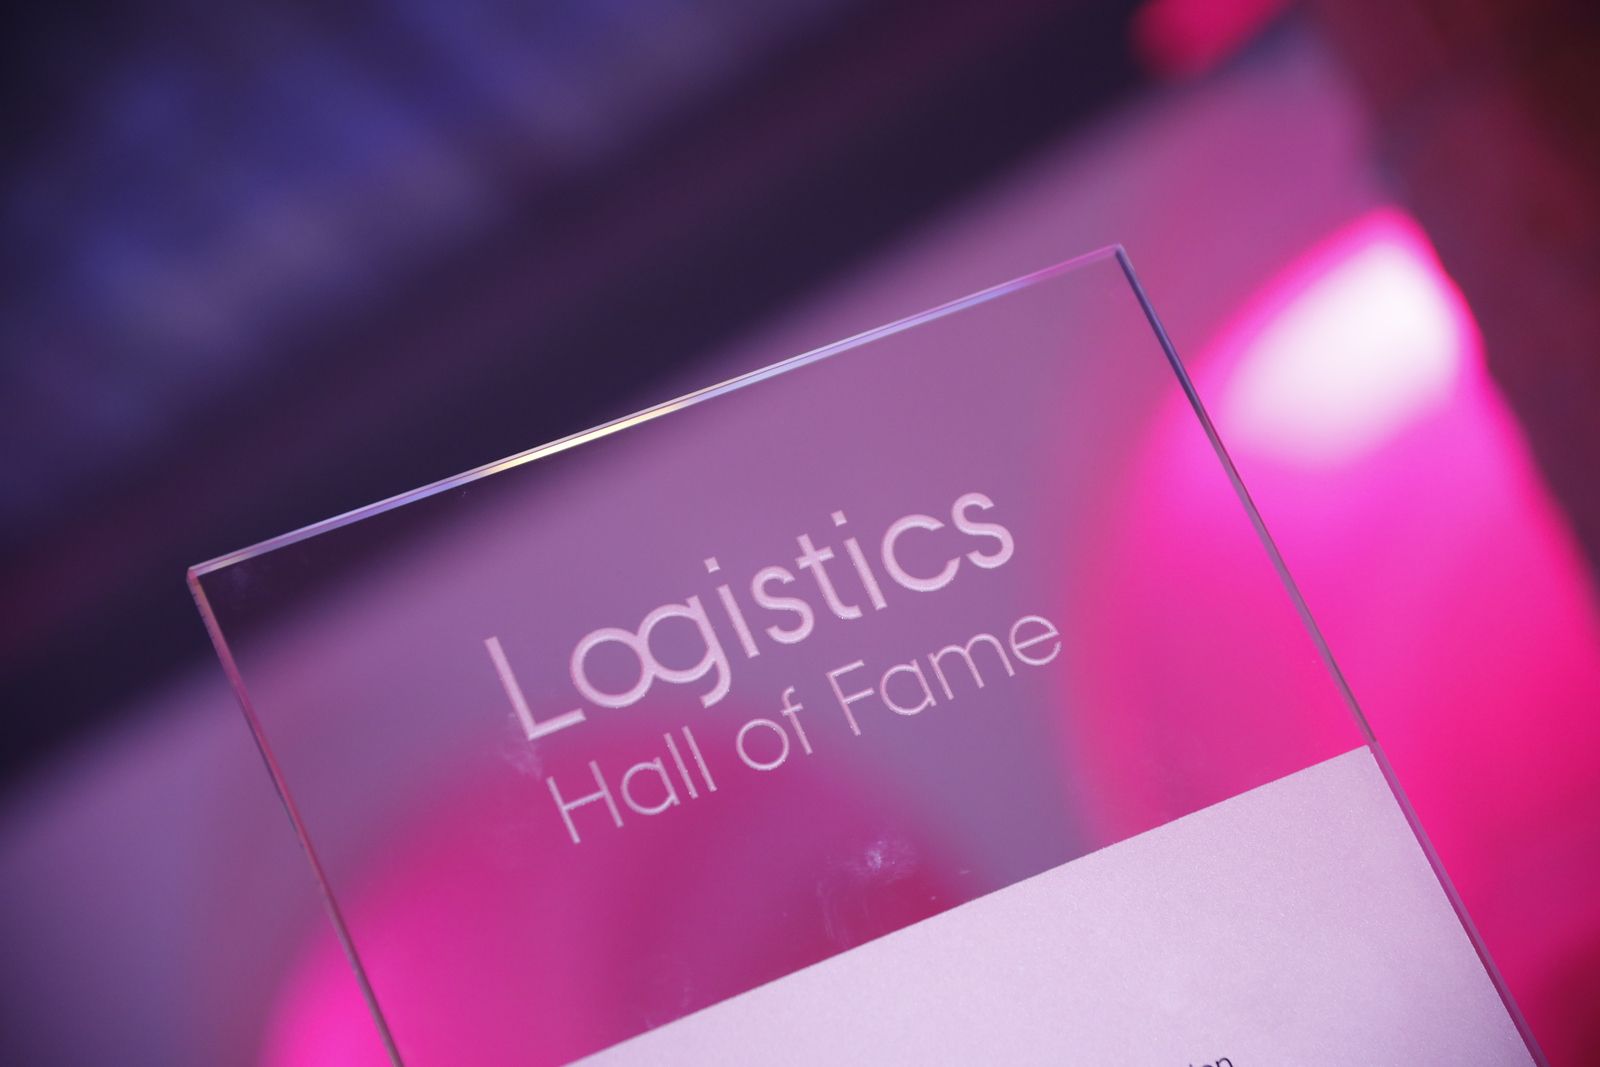 Logistics Hall of Fame starts with a new proposal phase